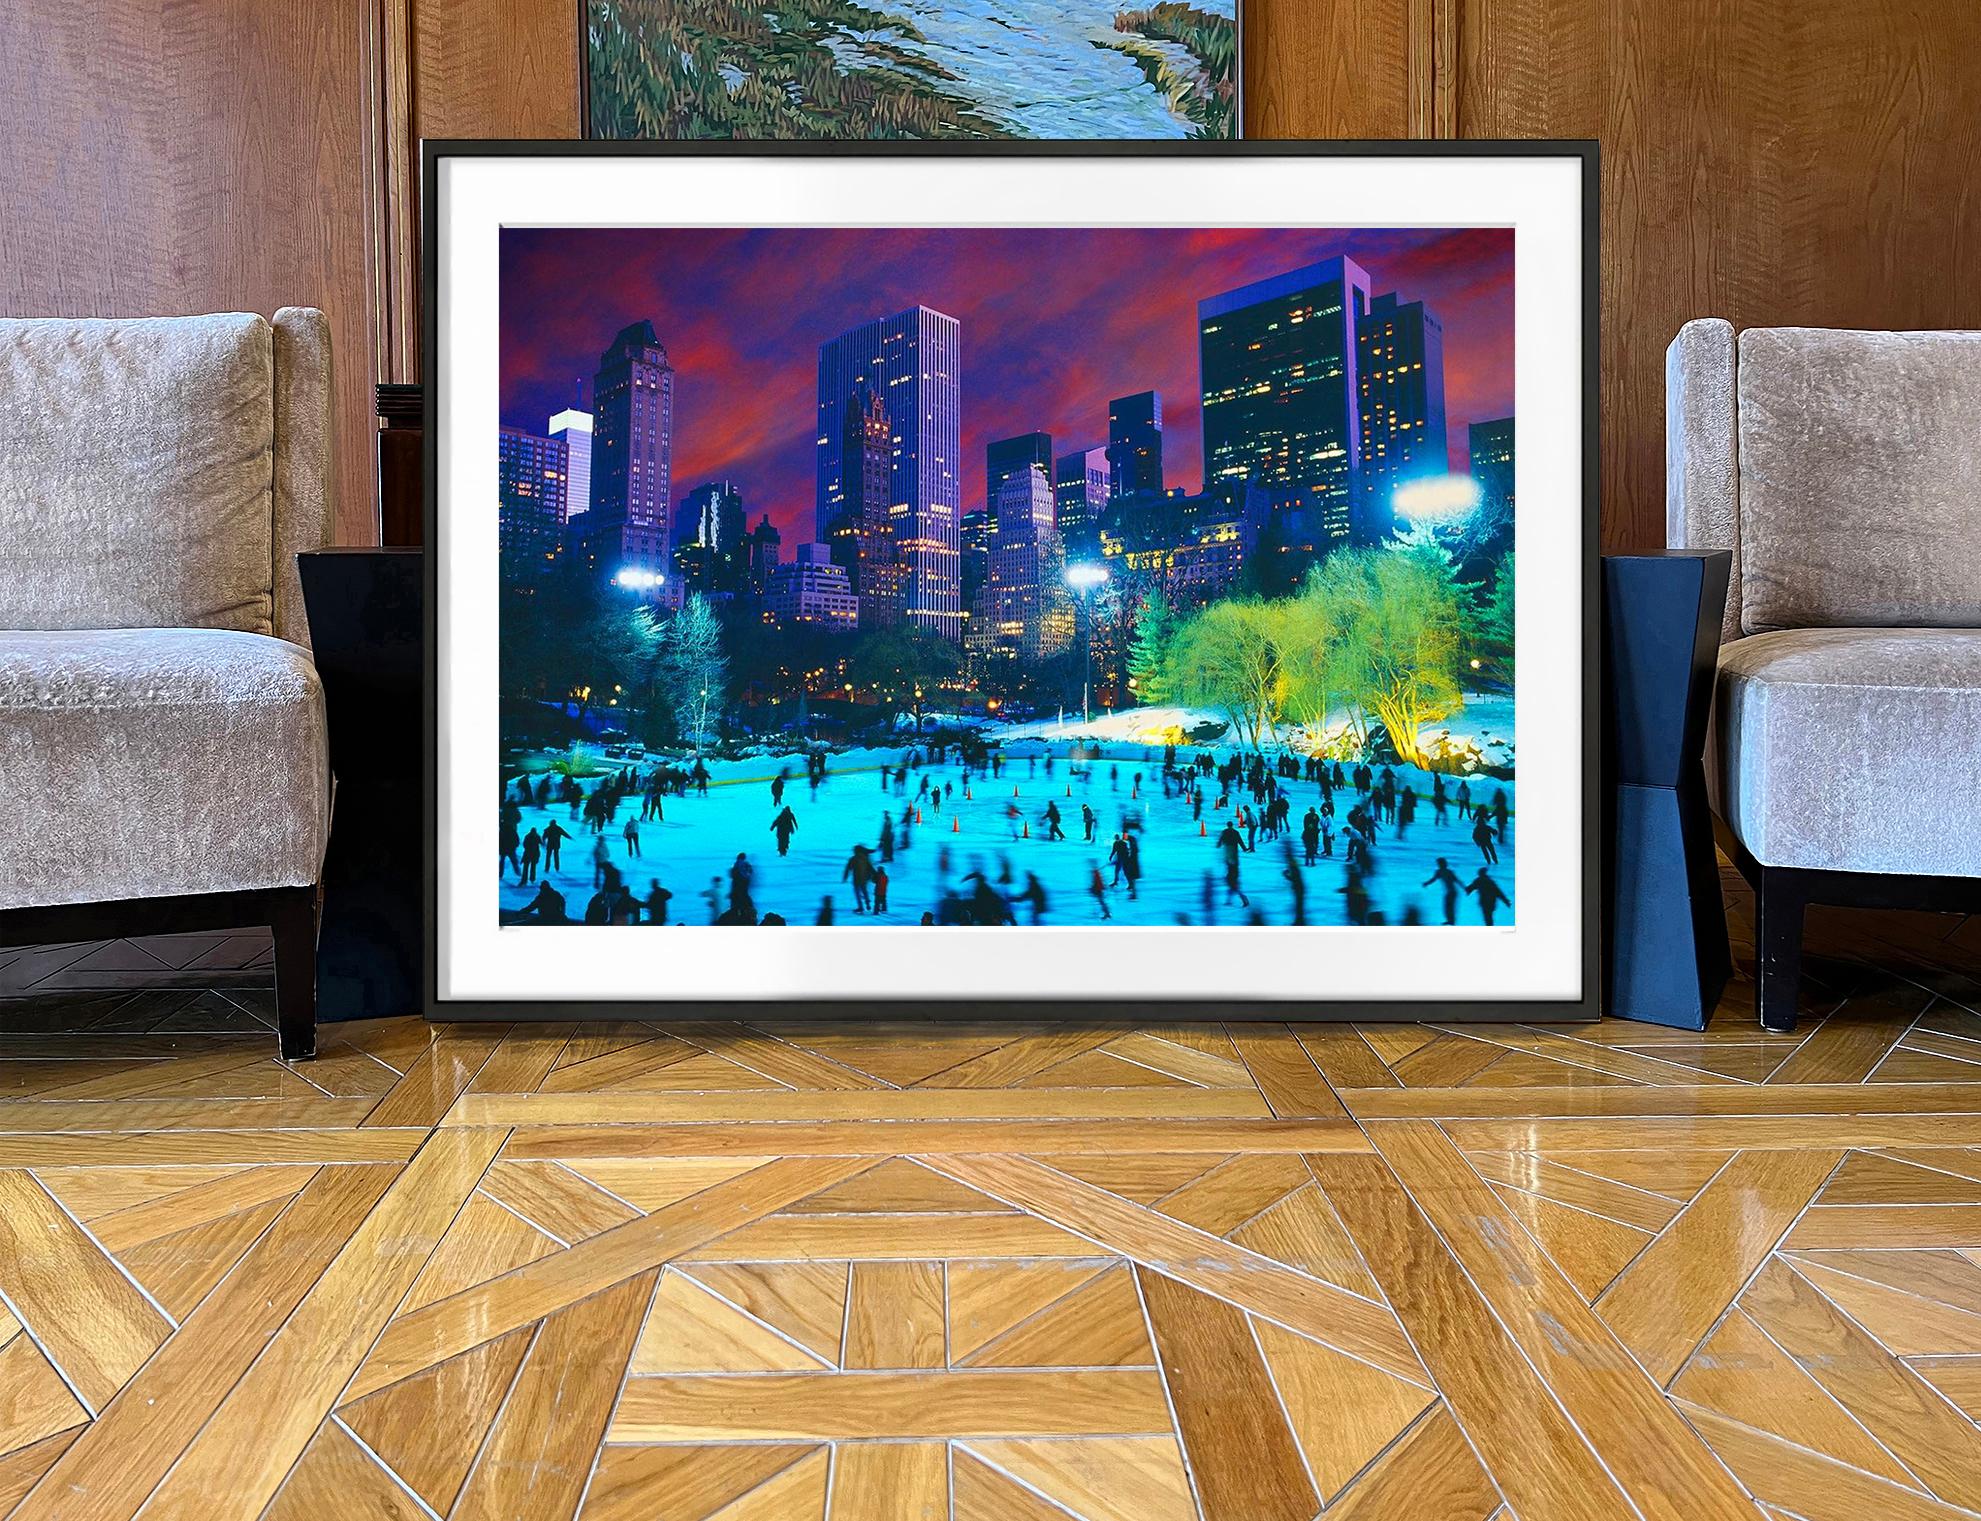  Central Park Ice Skaters at Night  Purple Sky in  New York City - Post-Impressionist Photograph by Mitchell Funk